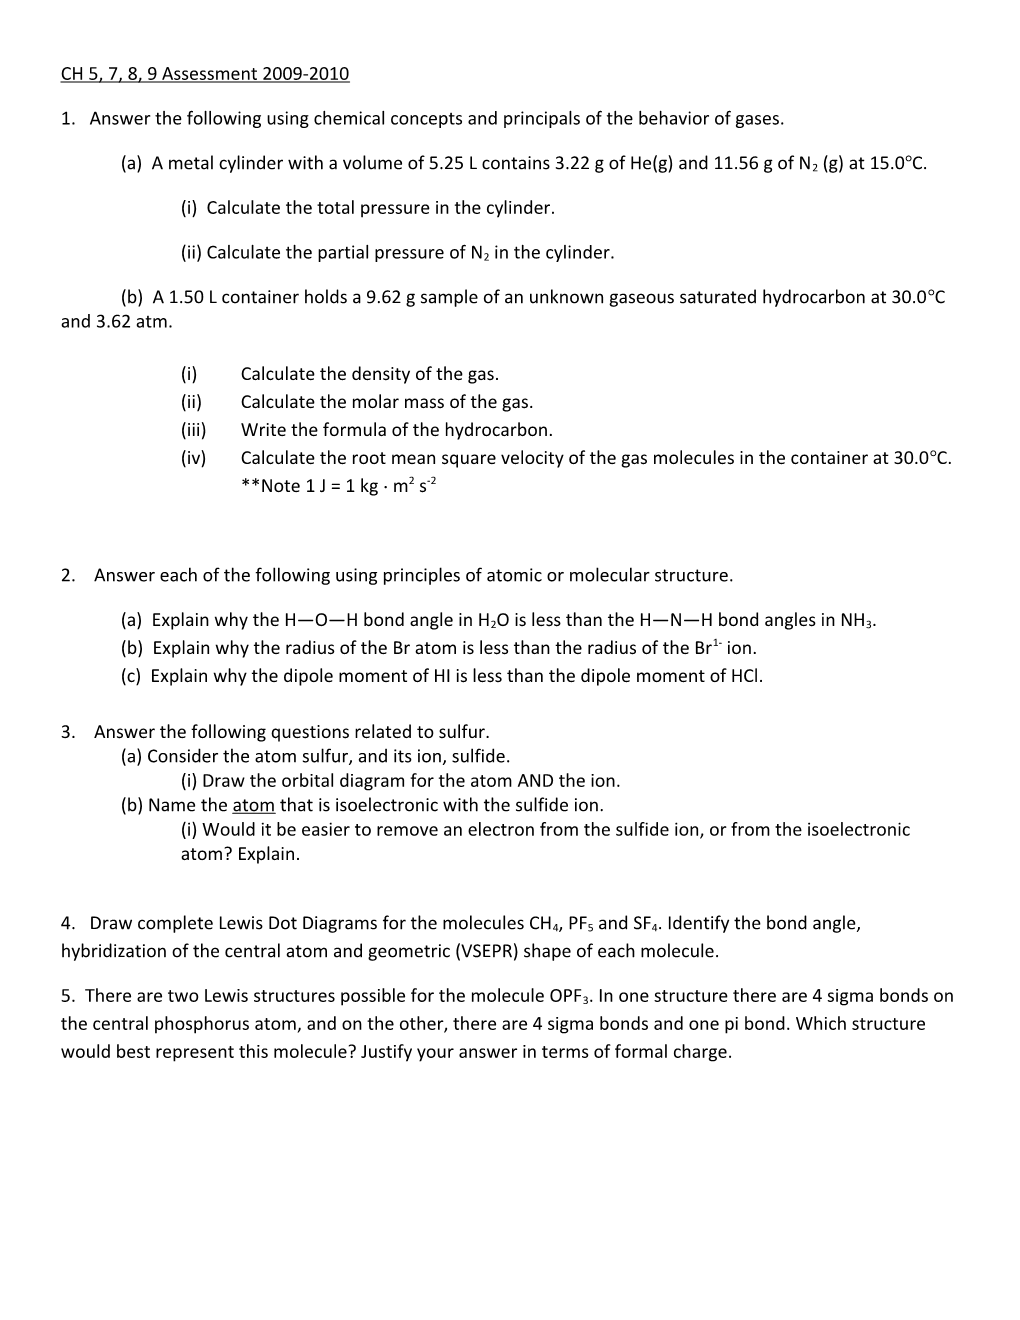 1. Answer the Following Using Chemical Concepts and Principals of the Behavior of Gases